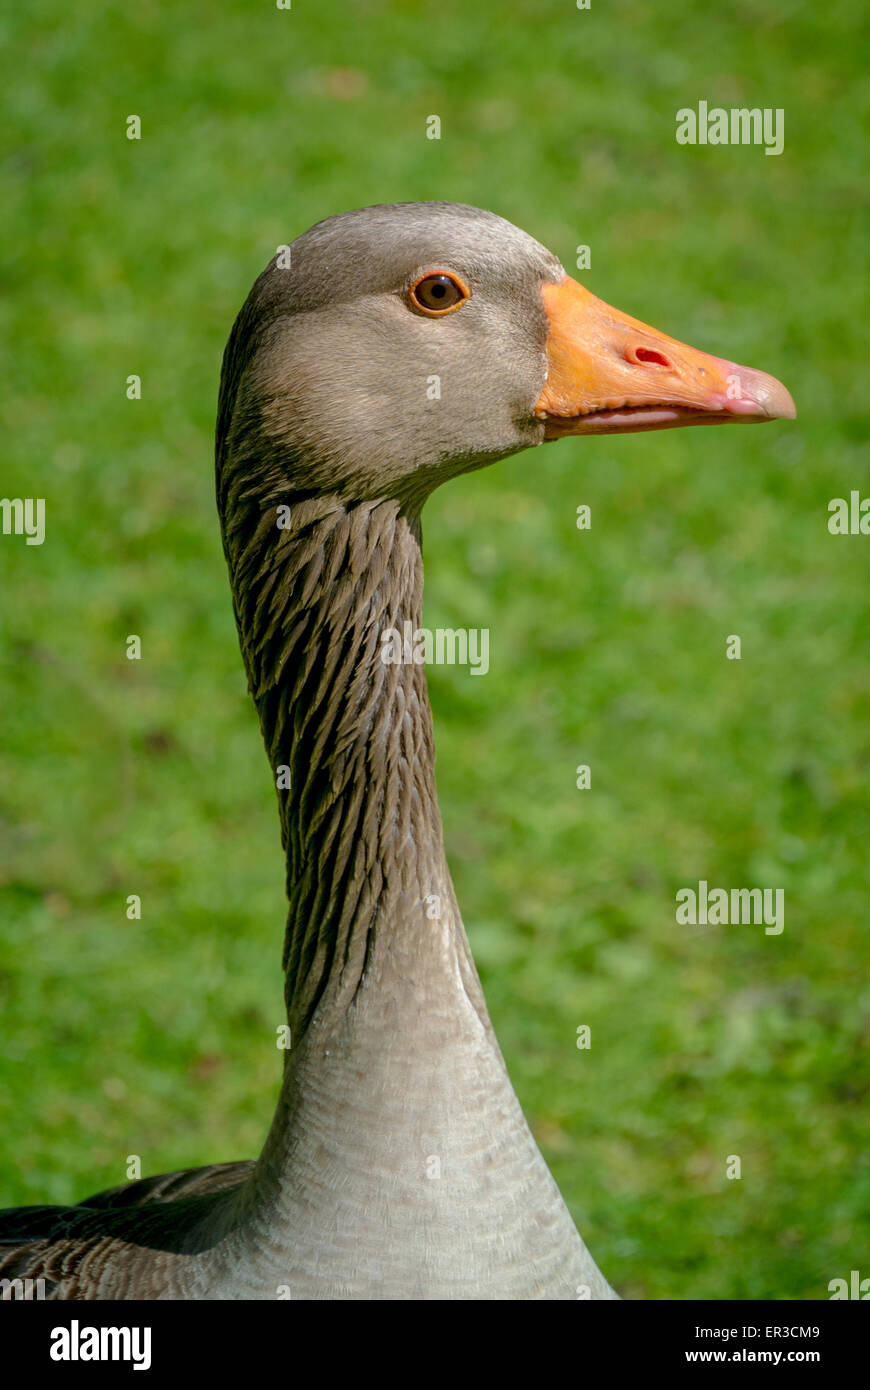 Side view of a Greylag goose's head. Stock Photo